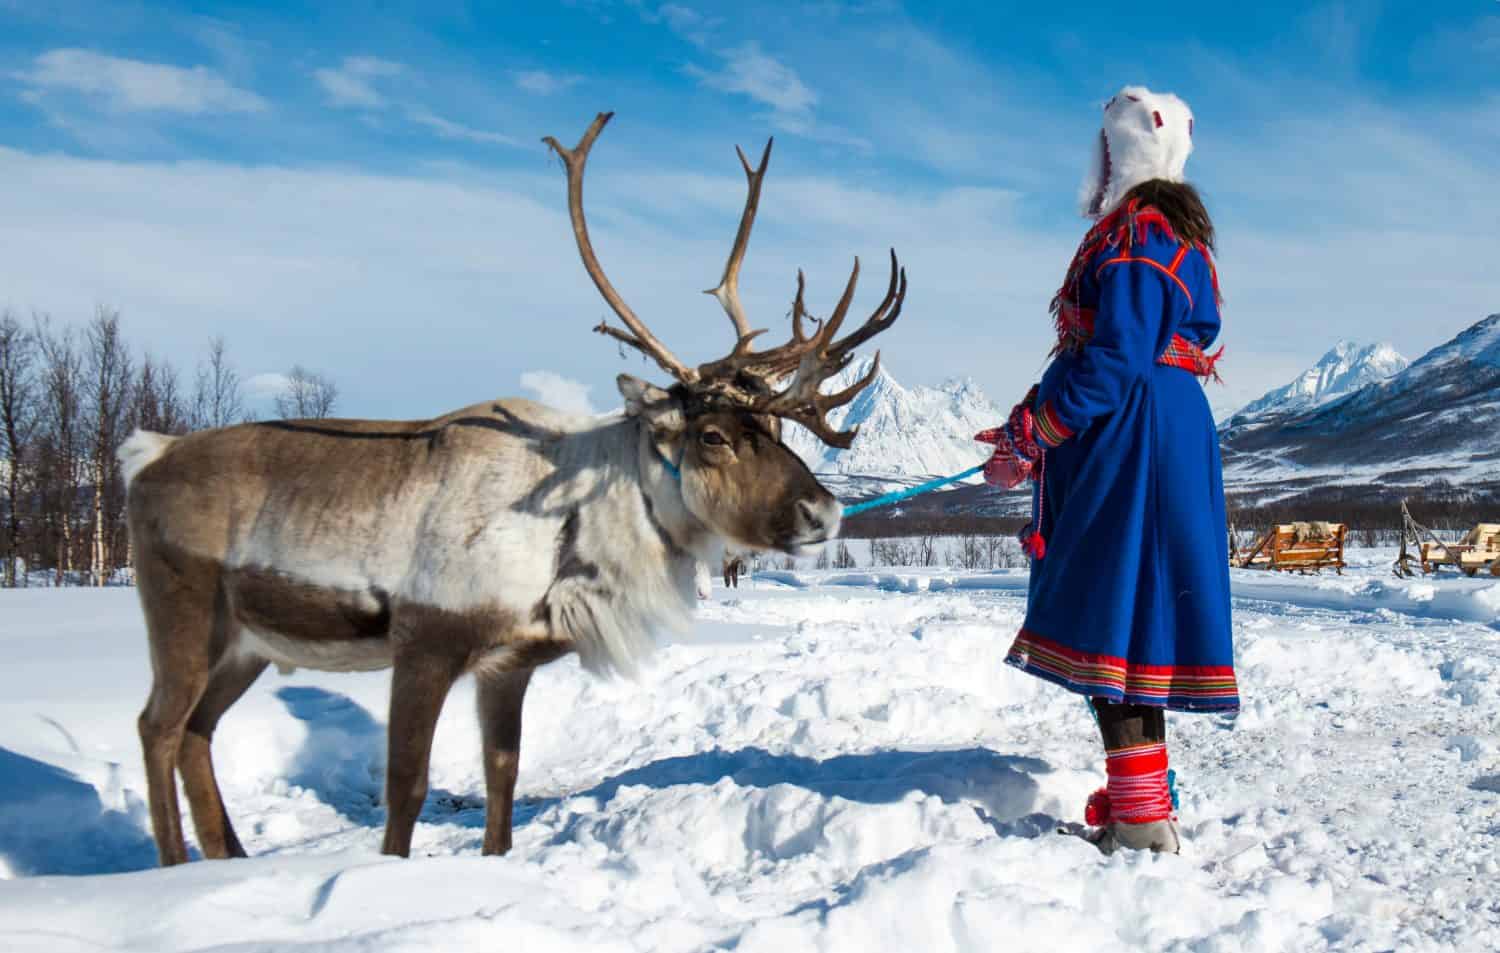 Northern Norway, a traditional dressed Sami woman .Tromso Lapland